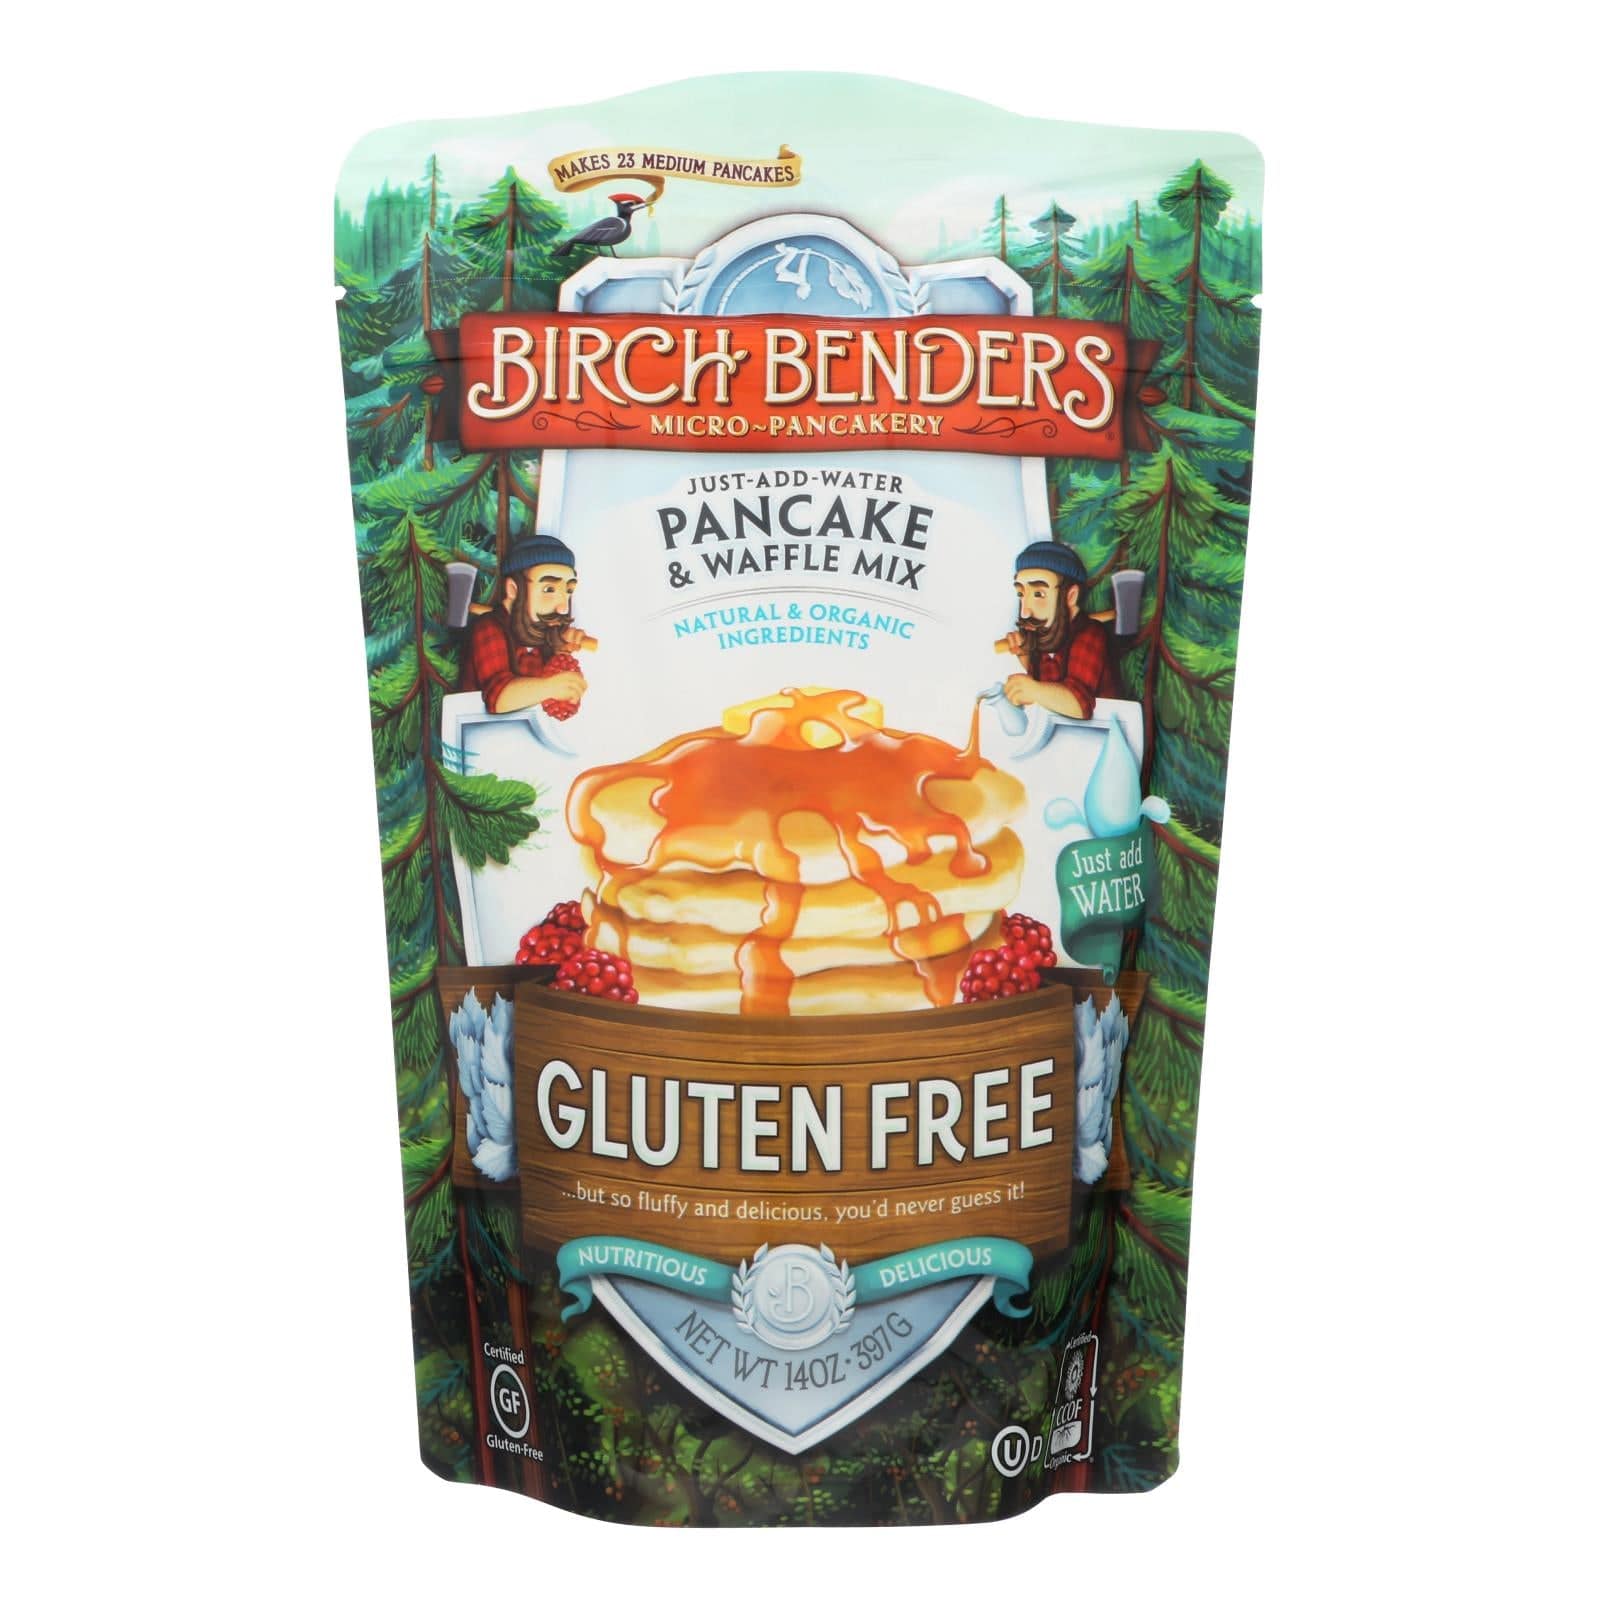 Buy Birch Benders Pancake And Waffle Mix - Gluten Free - Case Of 6 - 14 Oz.  at OnlyNaturals.us